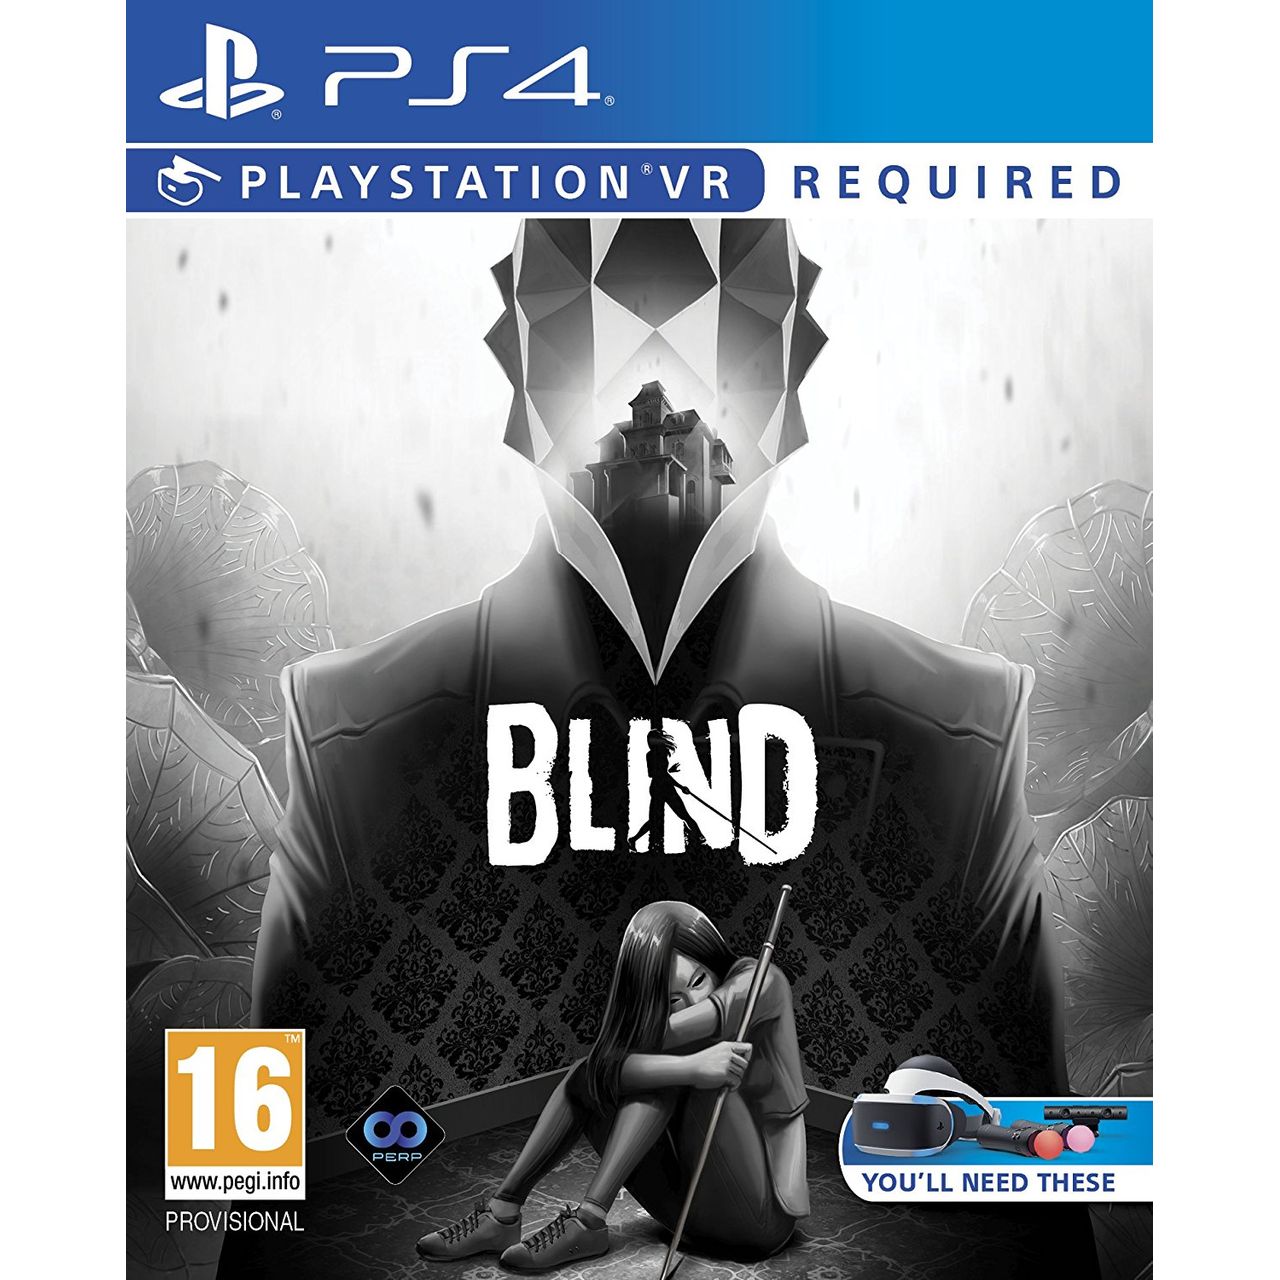 Blind for PlayStation 4 Review